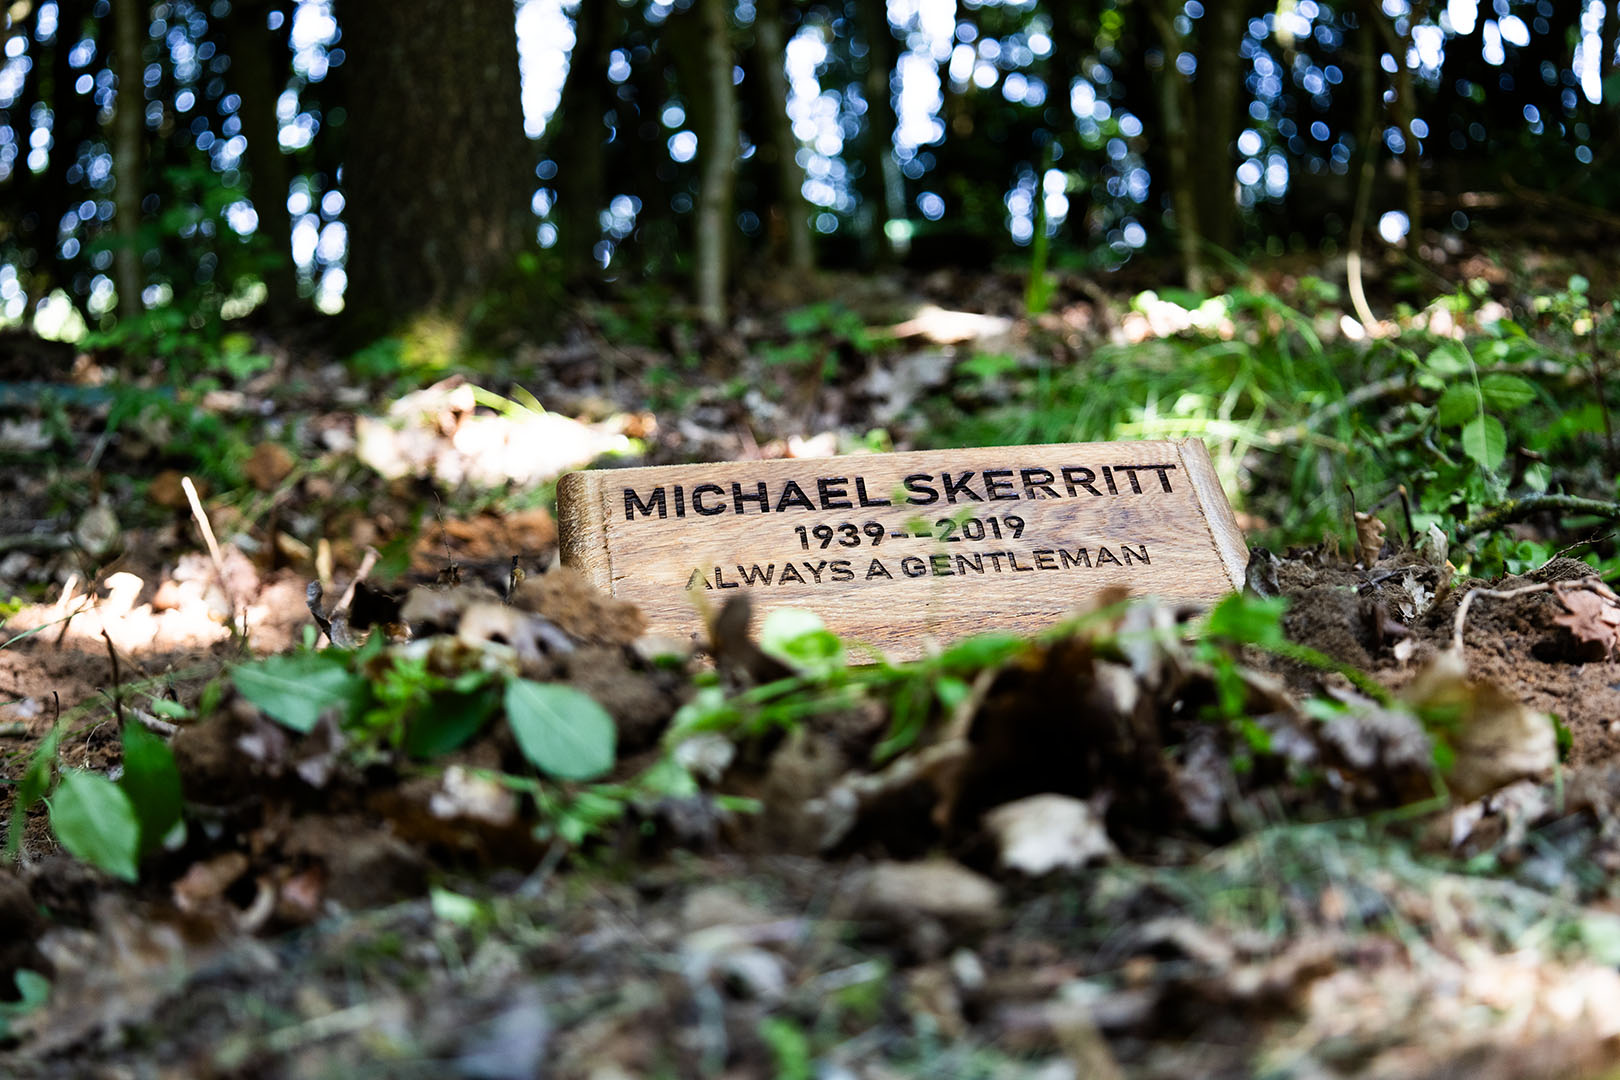 Deb Reed Celebrant Colchester Essex, the plaque for Michael Skerritt after officiating at his funeral ashes internment.